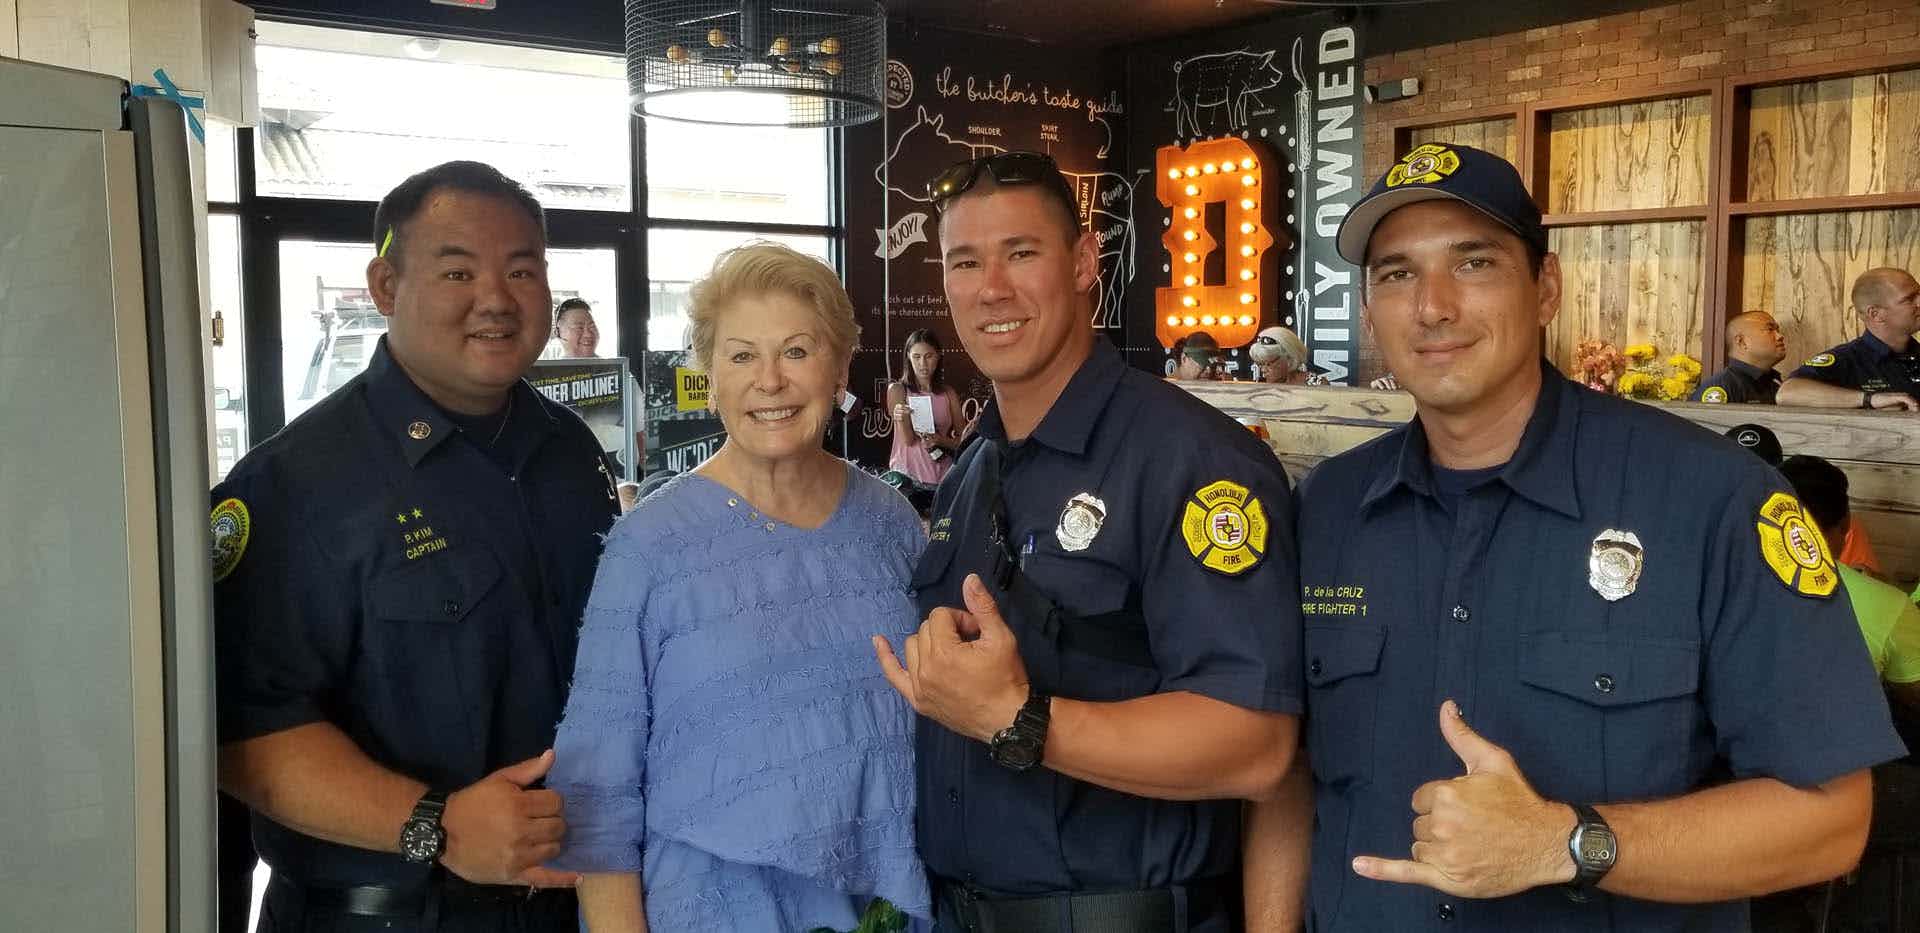 Restaurant News: Dickey's Says "Mahalo" to Local First Responders 